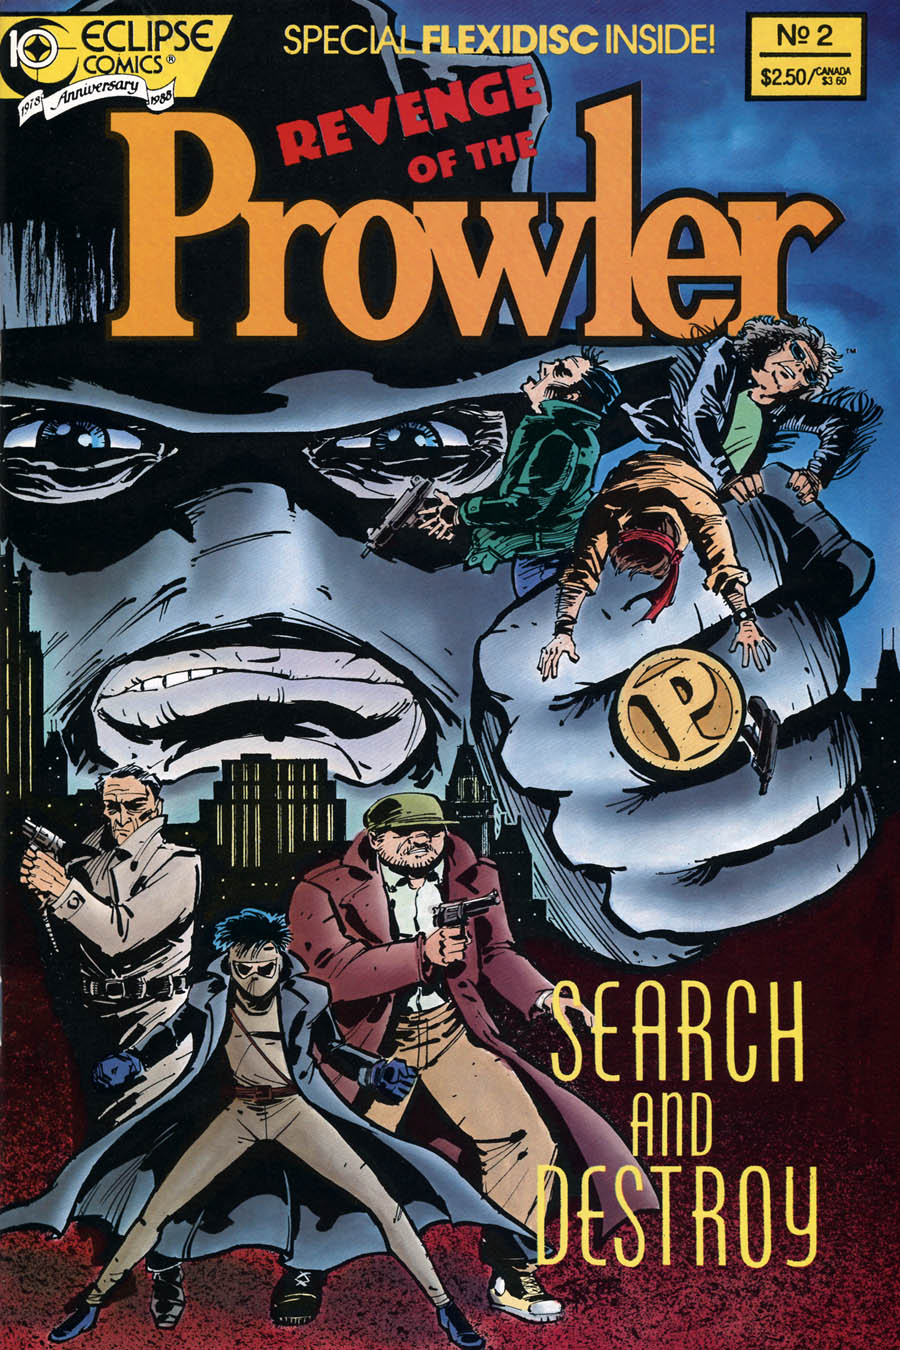 Read online Revenge of the Prowler comic -  Issue #2 - 1